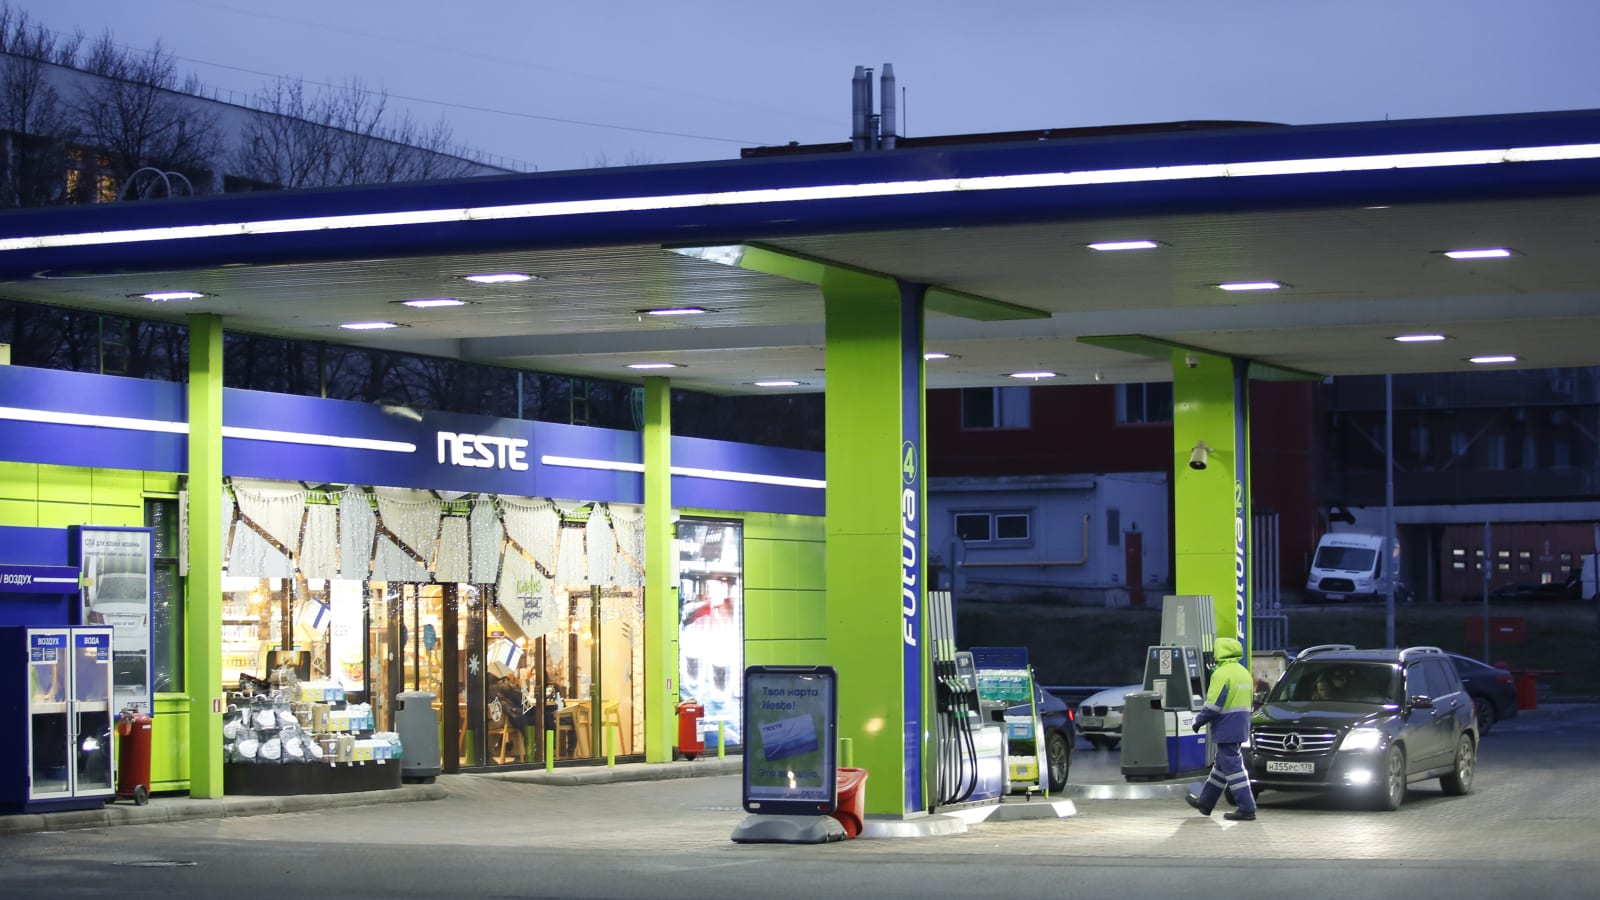 Energy giant Neste sees a ‘K-shaped’ recovery for its business, CEO says- oil and gas 360